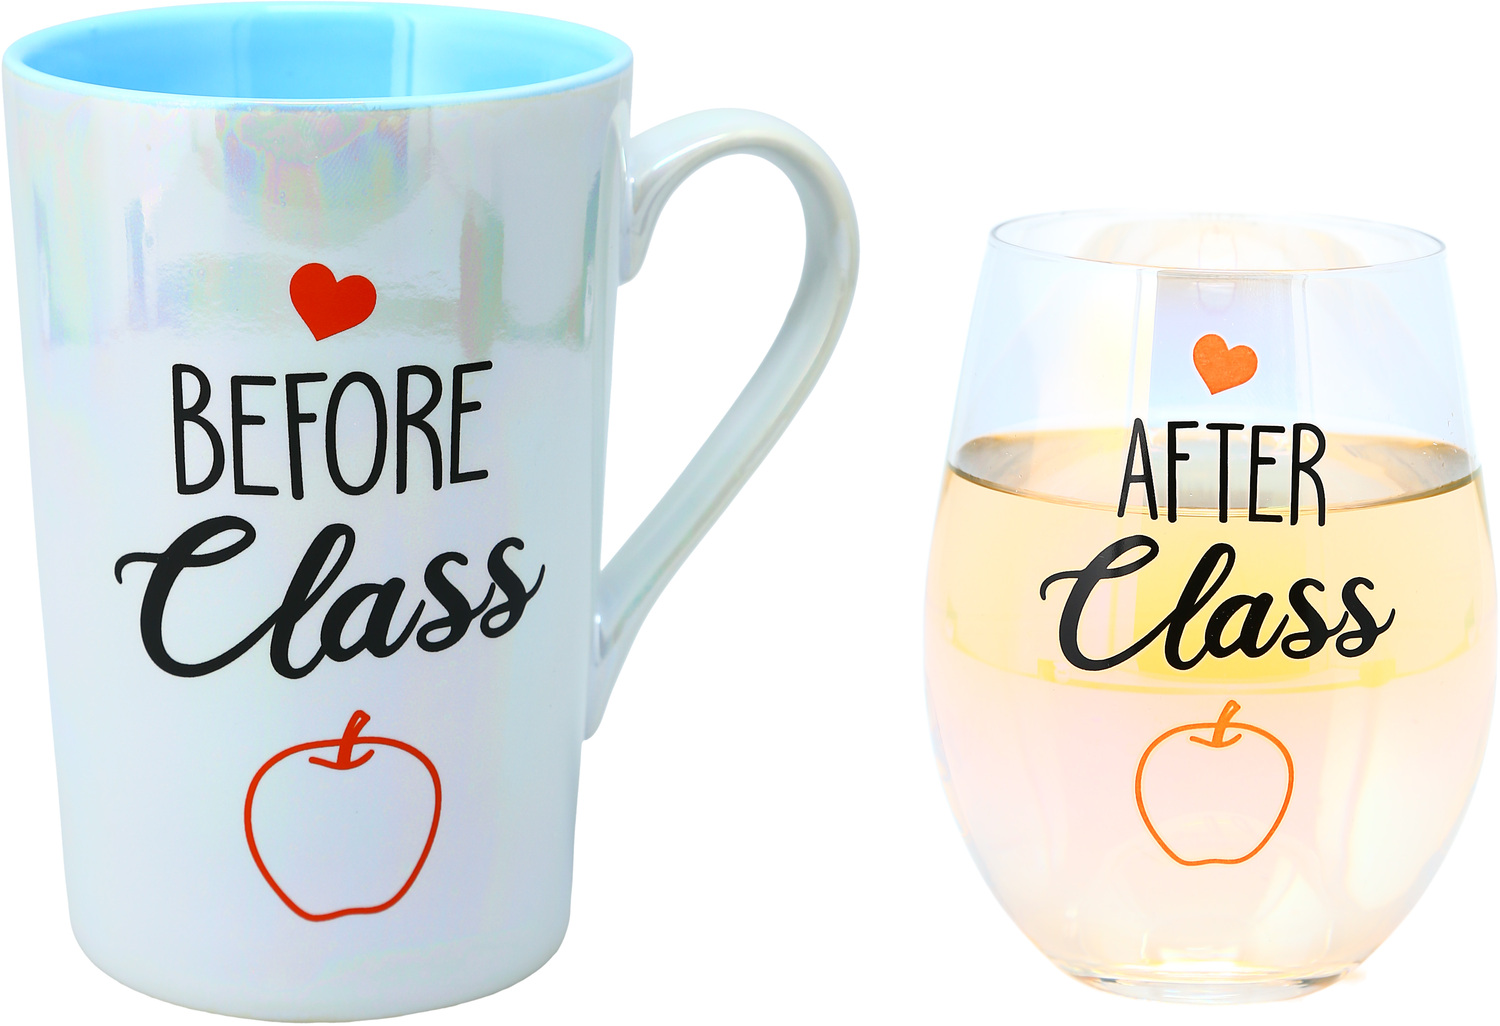 Before & After Class by Essentially Yours - Before & After Class - 18 oz Stemless Glass & 15 oz Latte Cup Set